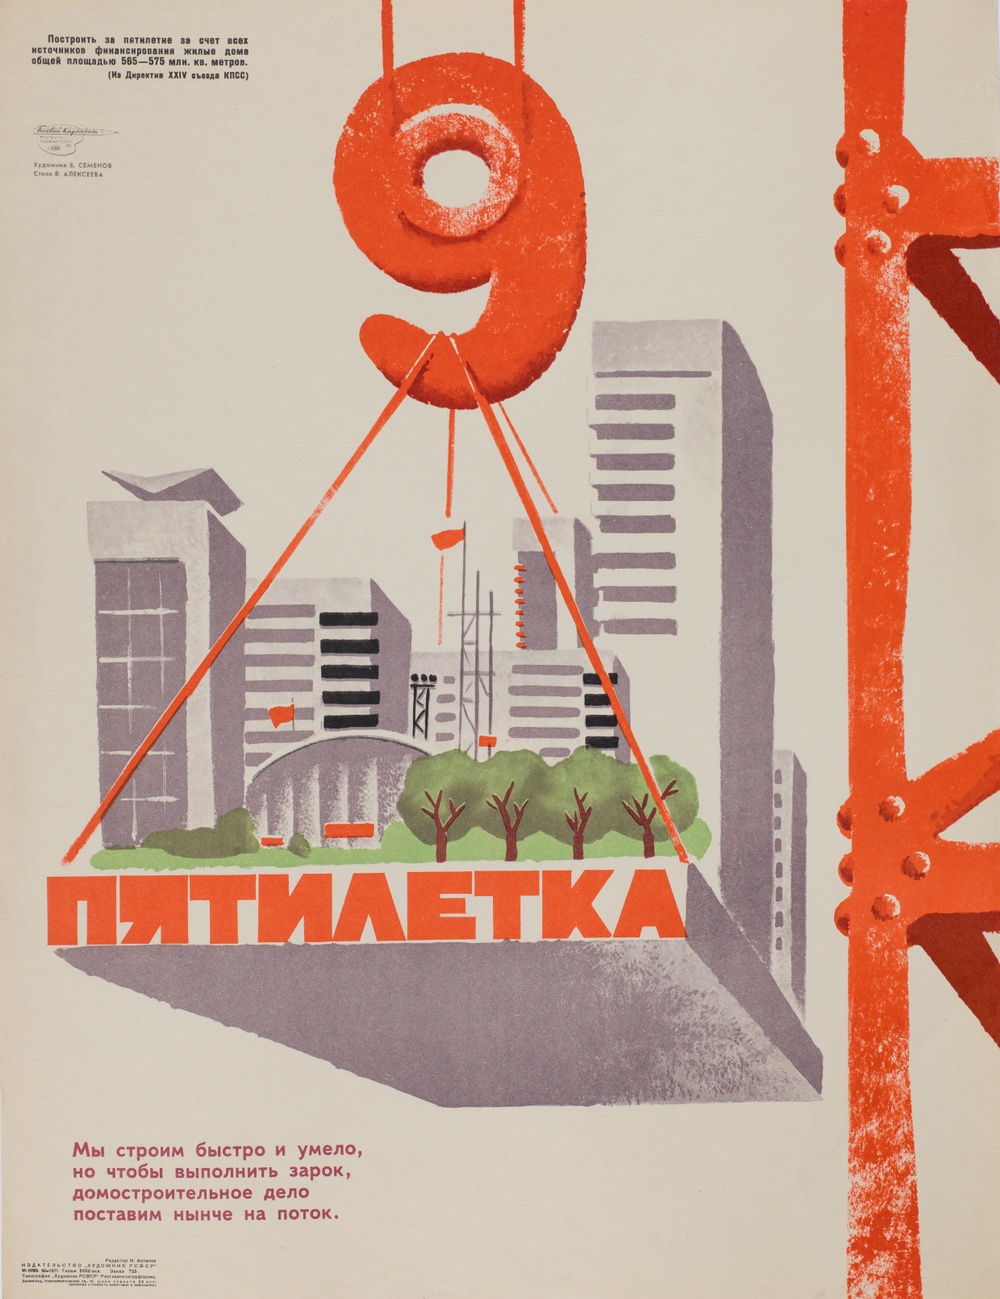 B. Semionov and V. Alekseyev. The 9th Five-Year Plan. We build quickly and skilfully. Today we will mass-produce houses, 1971
Poster, Soviet Union
